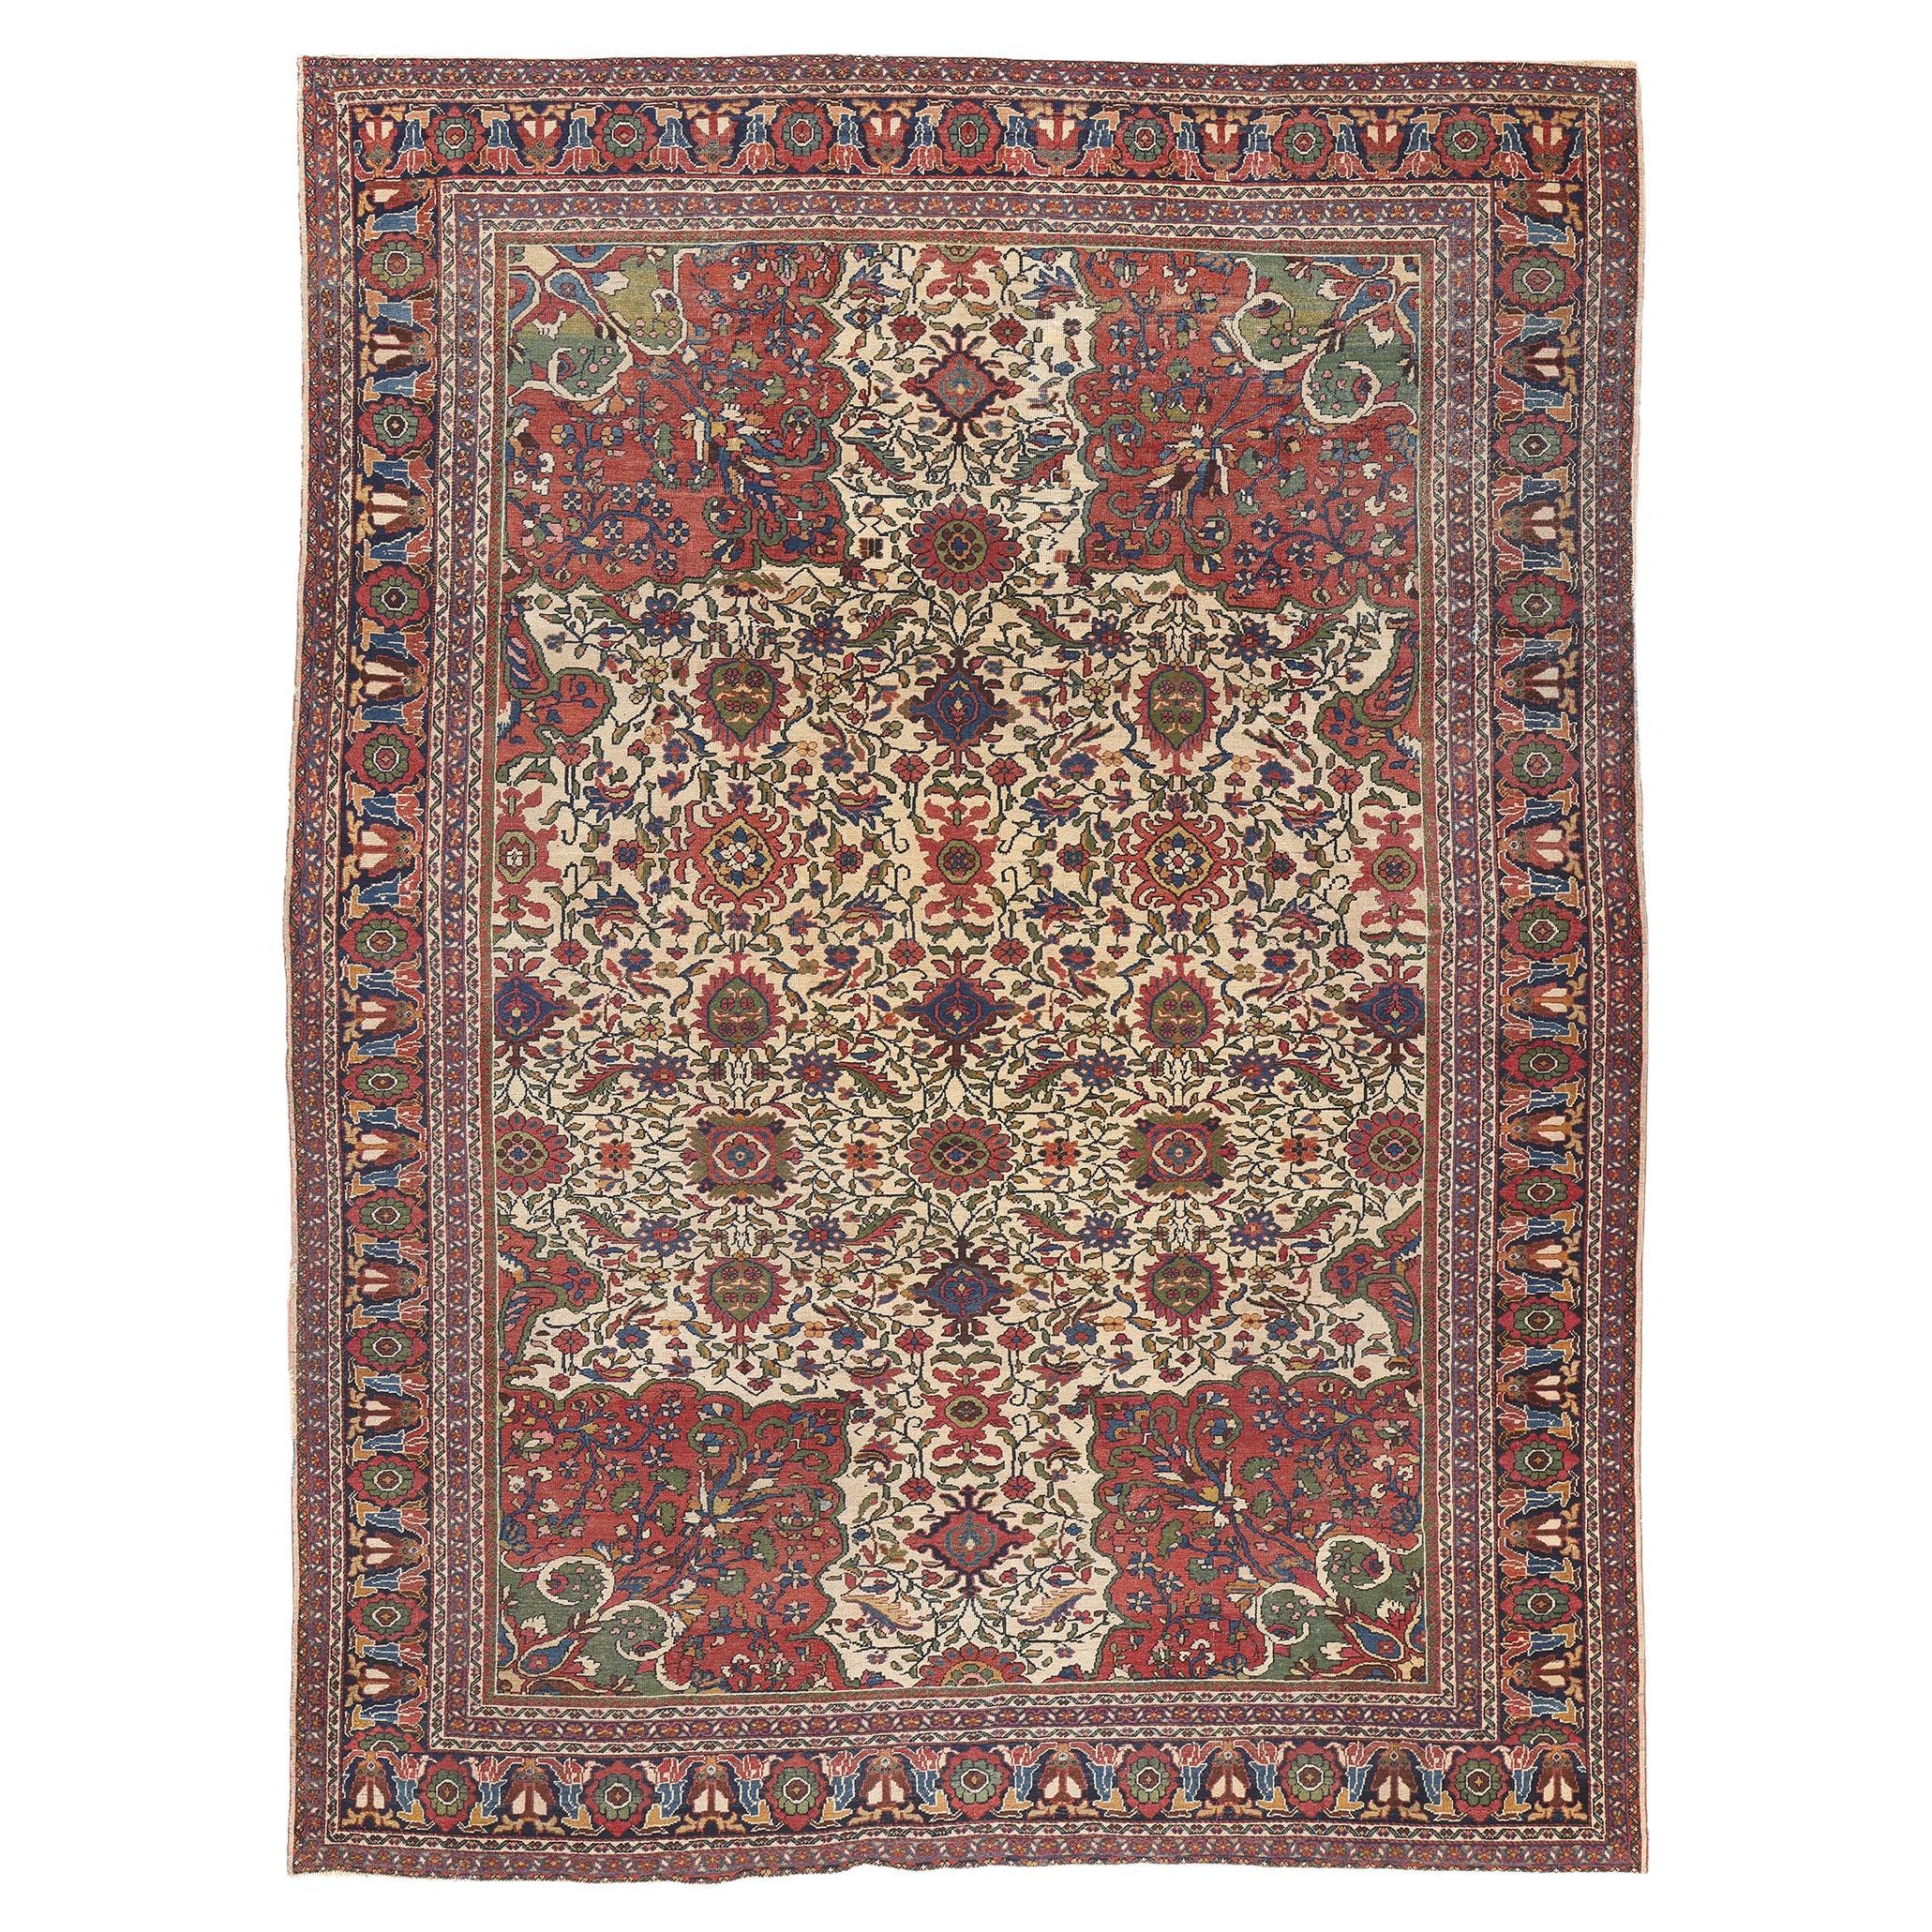 Antique Persian Mahal Rug, Ivy League Style Meets Relaxed Refinement